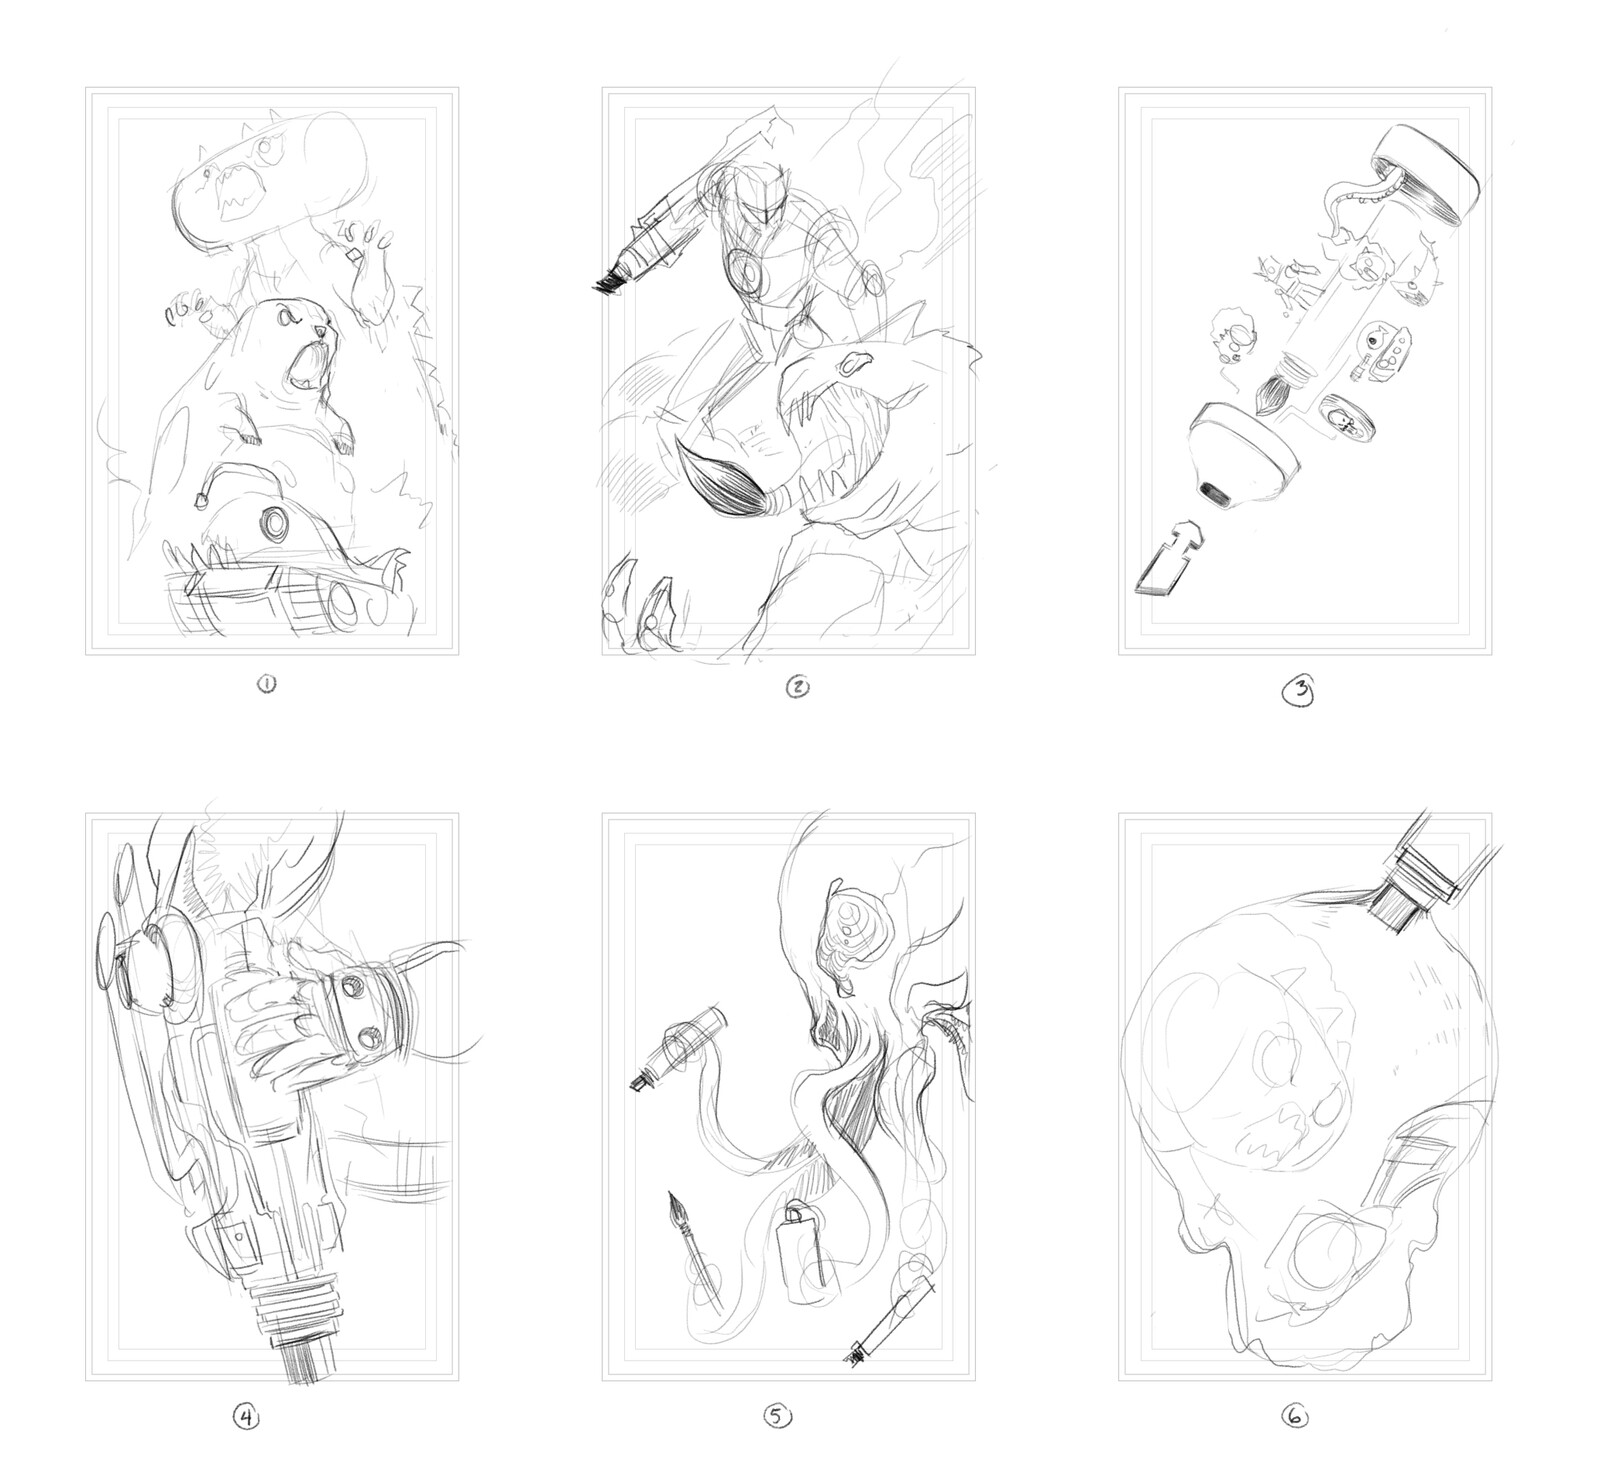 Thumbnails of different poster ideas. Someday, I might go back and work on one of these.